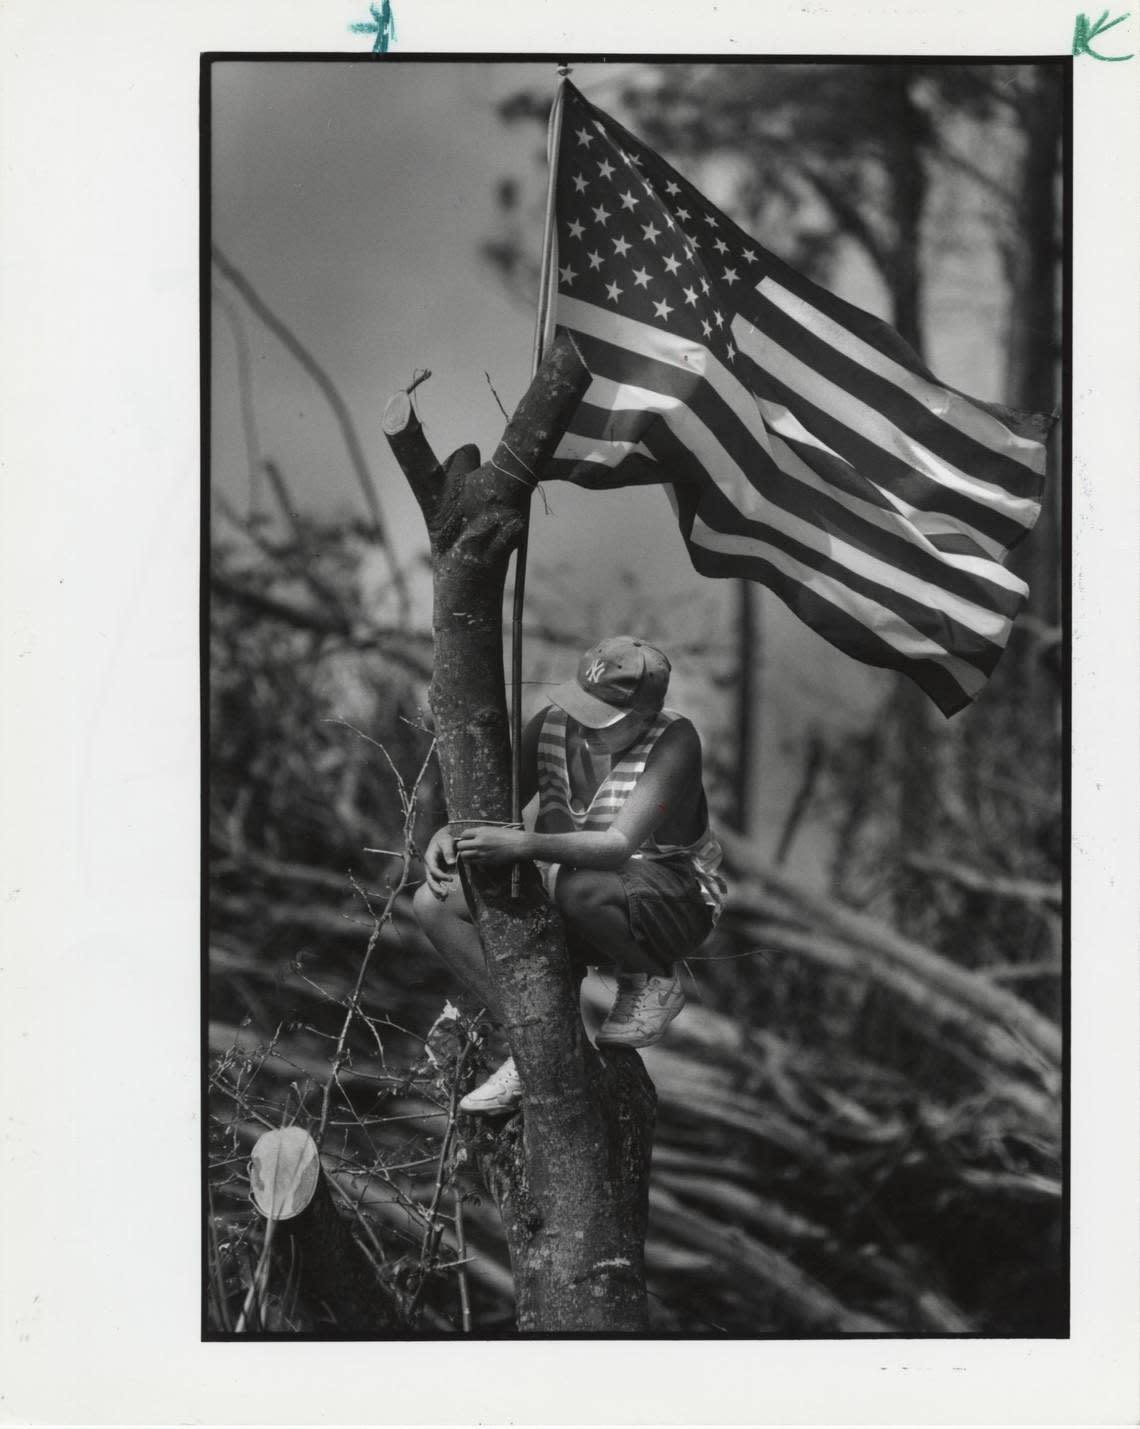 After clearing tree debris left in his front yard by Hurricane Andrew a little over a week earlier, Chris Schere, then 14, erected his personal symbol of hope at his South Miami-Dade home high in a trimmed tree on Sept. 4, 1992.